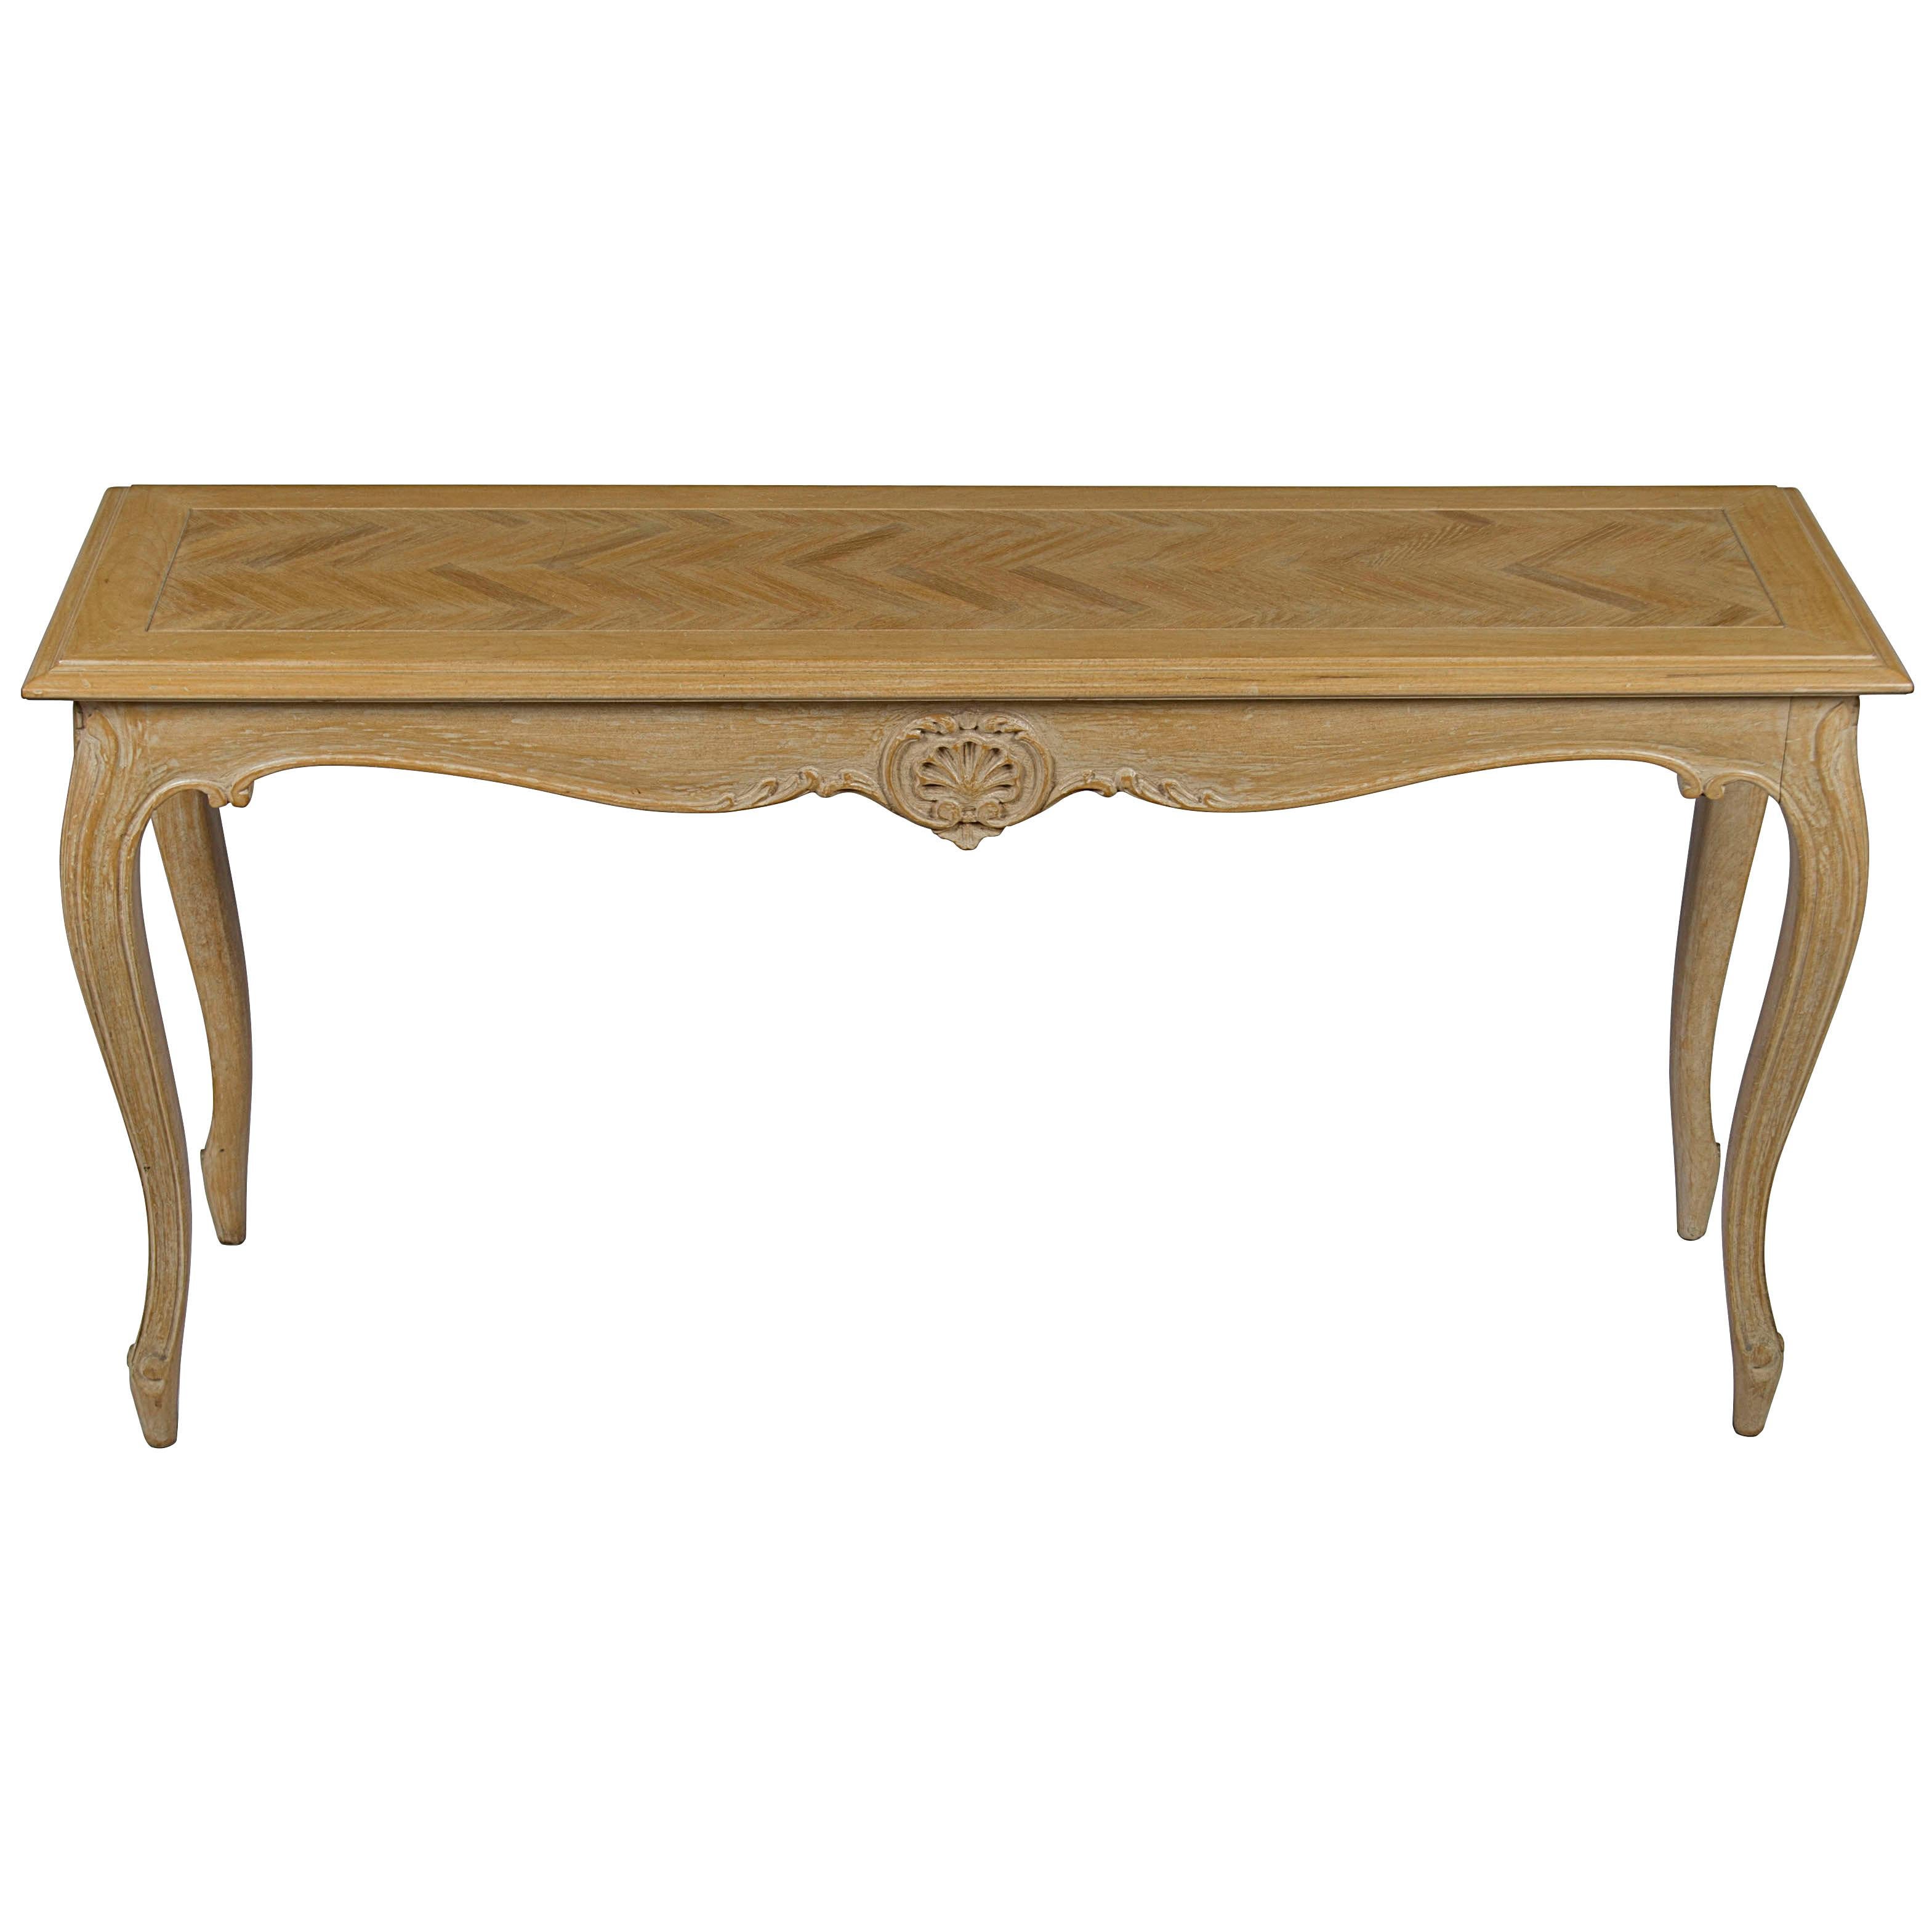 French Provincial Style Rustic Long Narrow Sofa Console Table For Sale